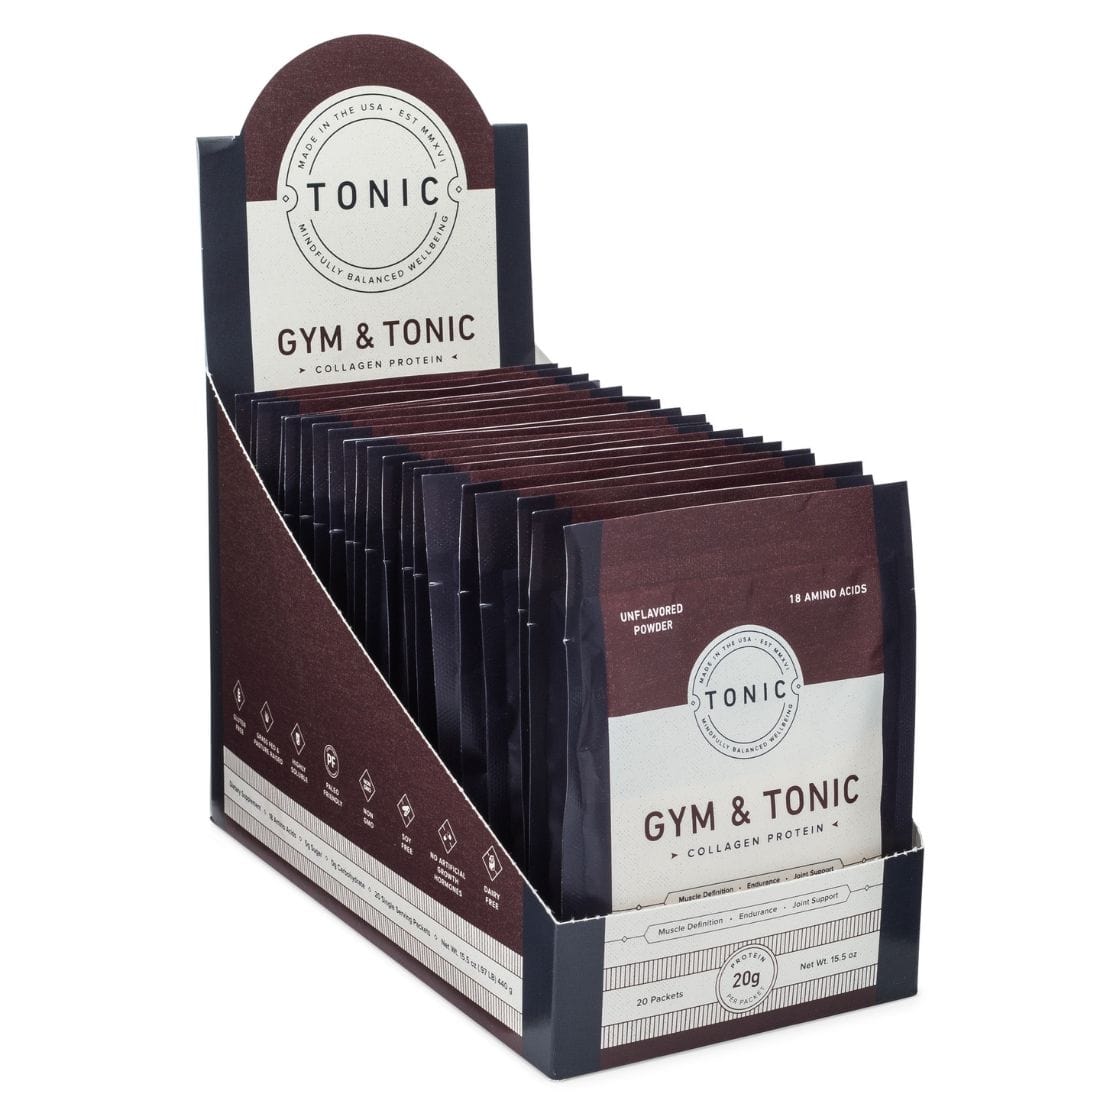 Tonic Products Gym & Tonic (Collagen Protein)